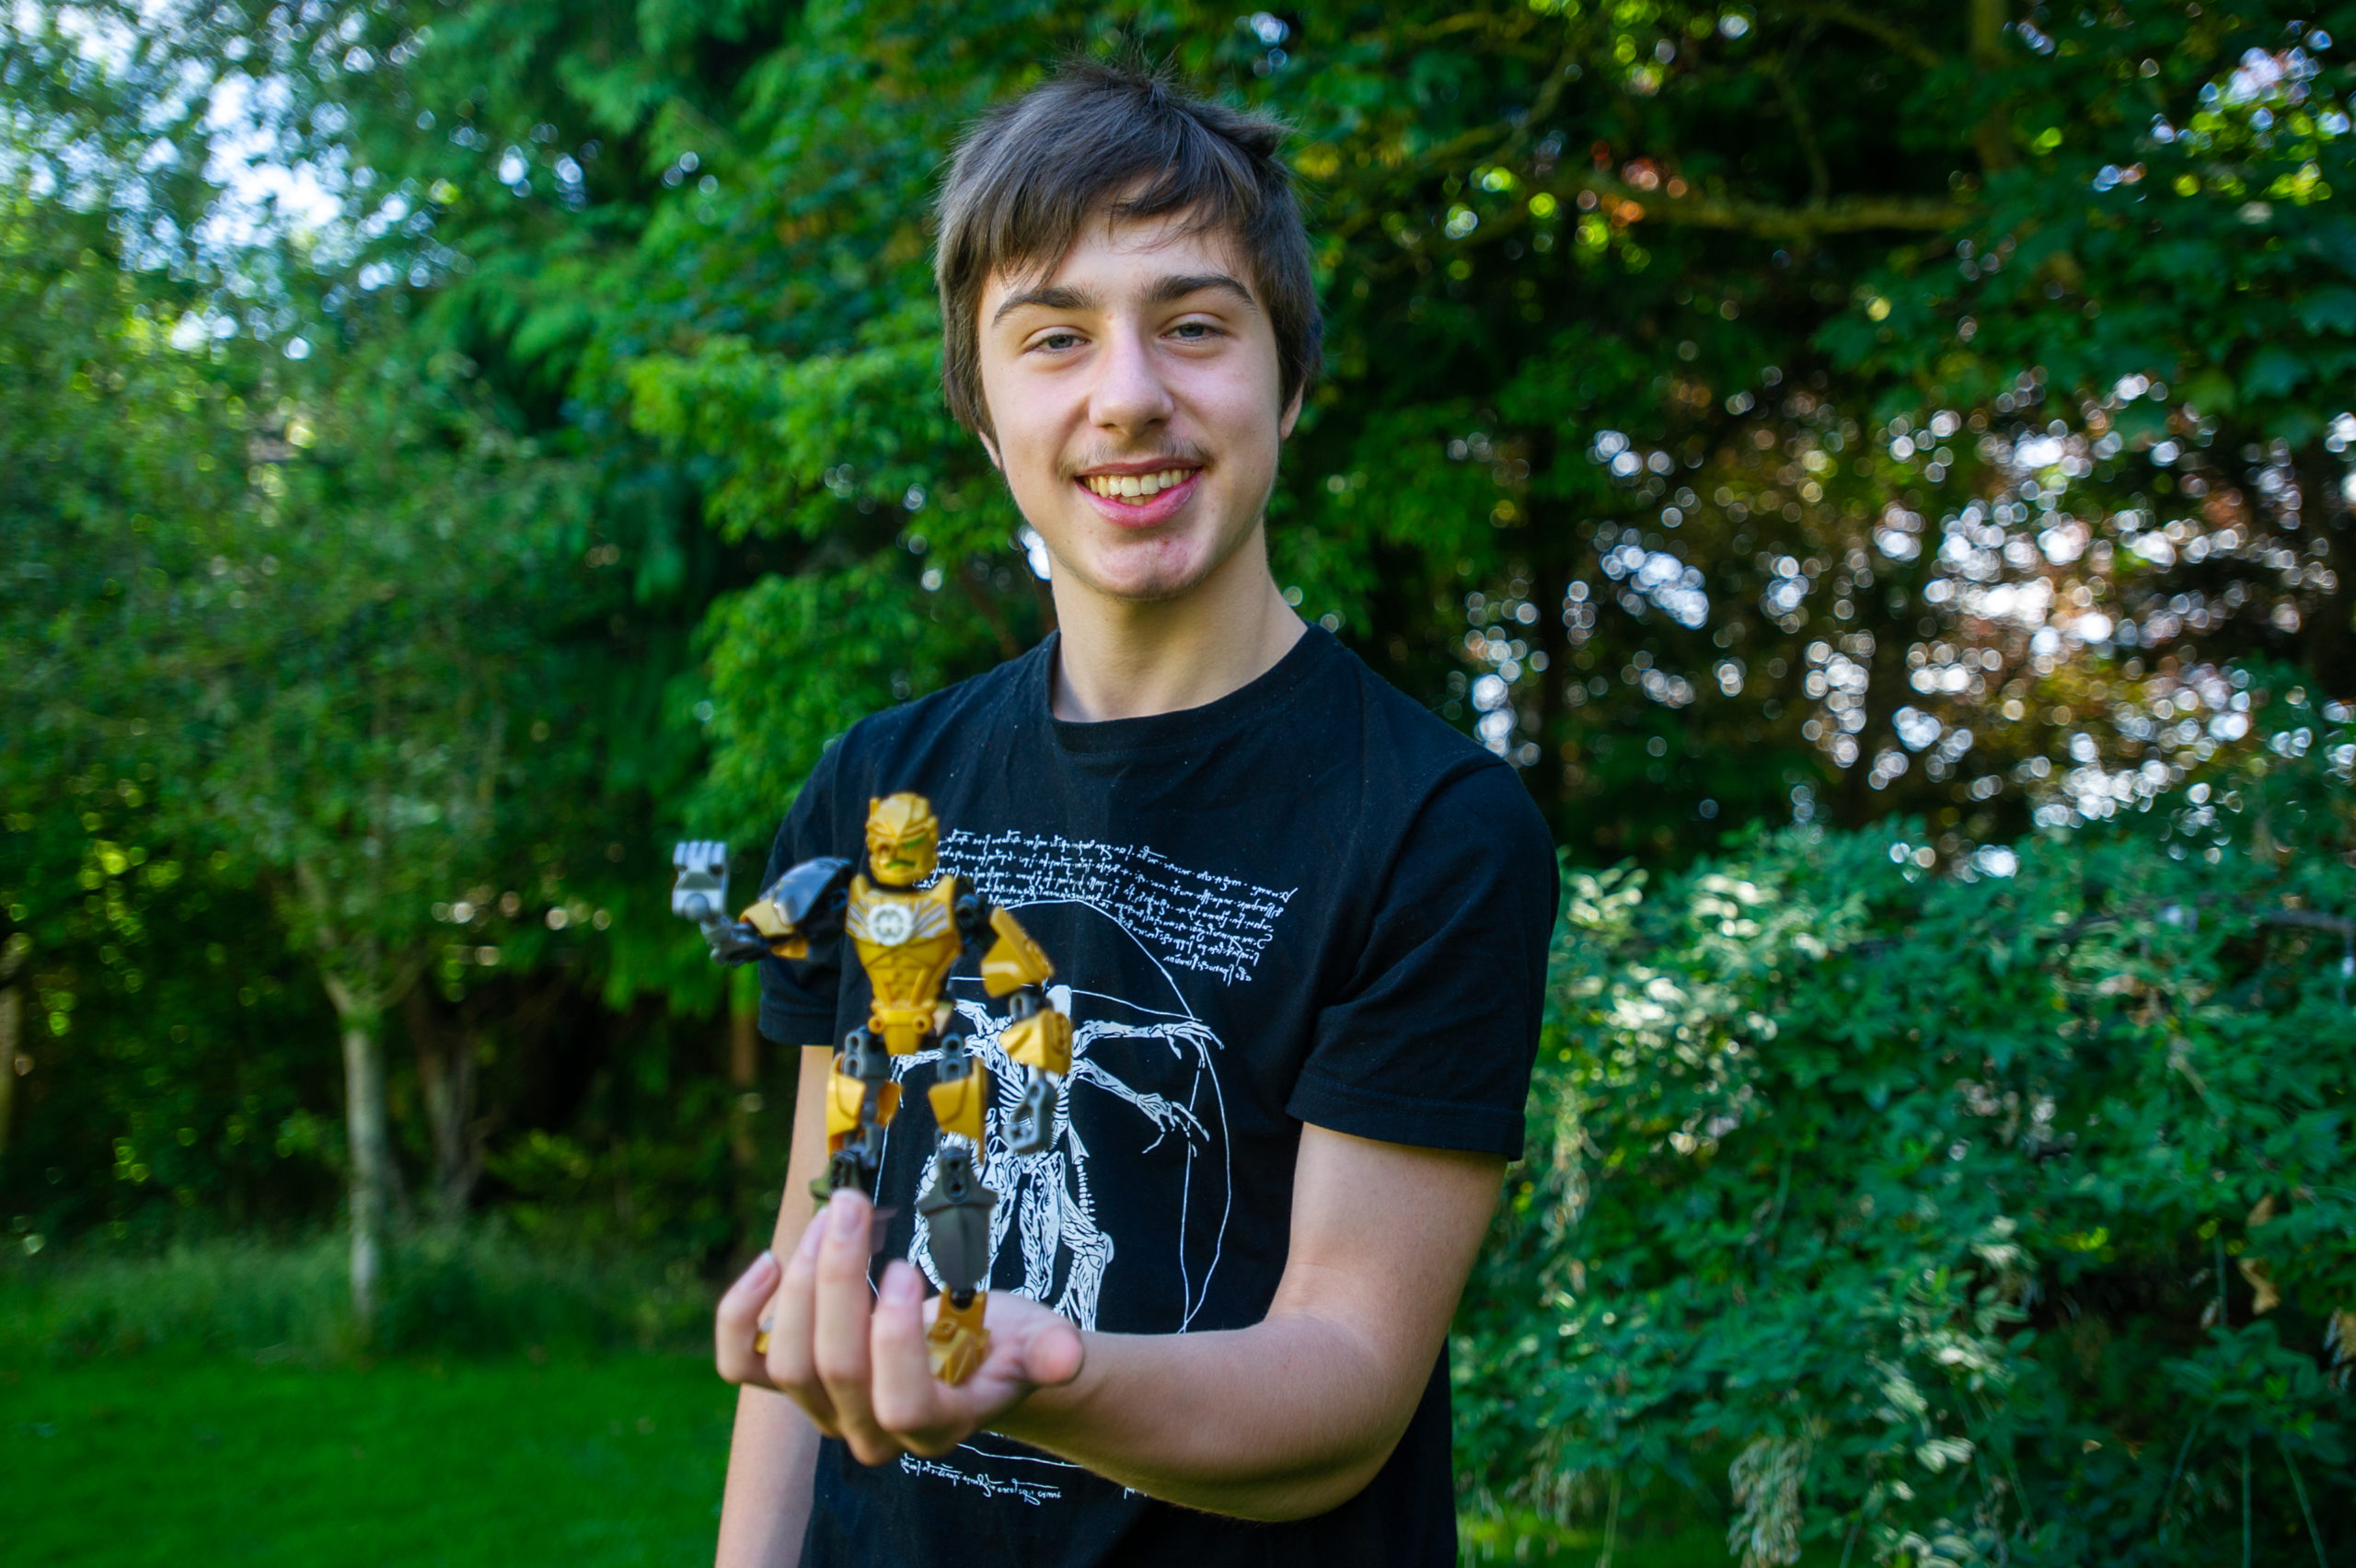 Dundee High School pupil Andrew Loveday created the end-of-year film with a Lego hero character.